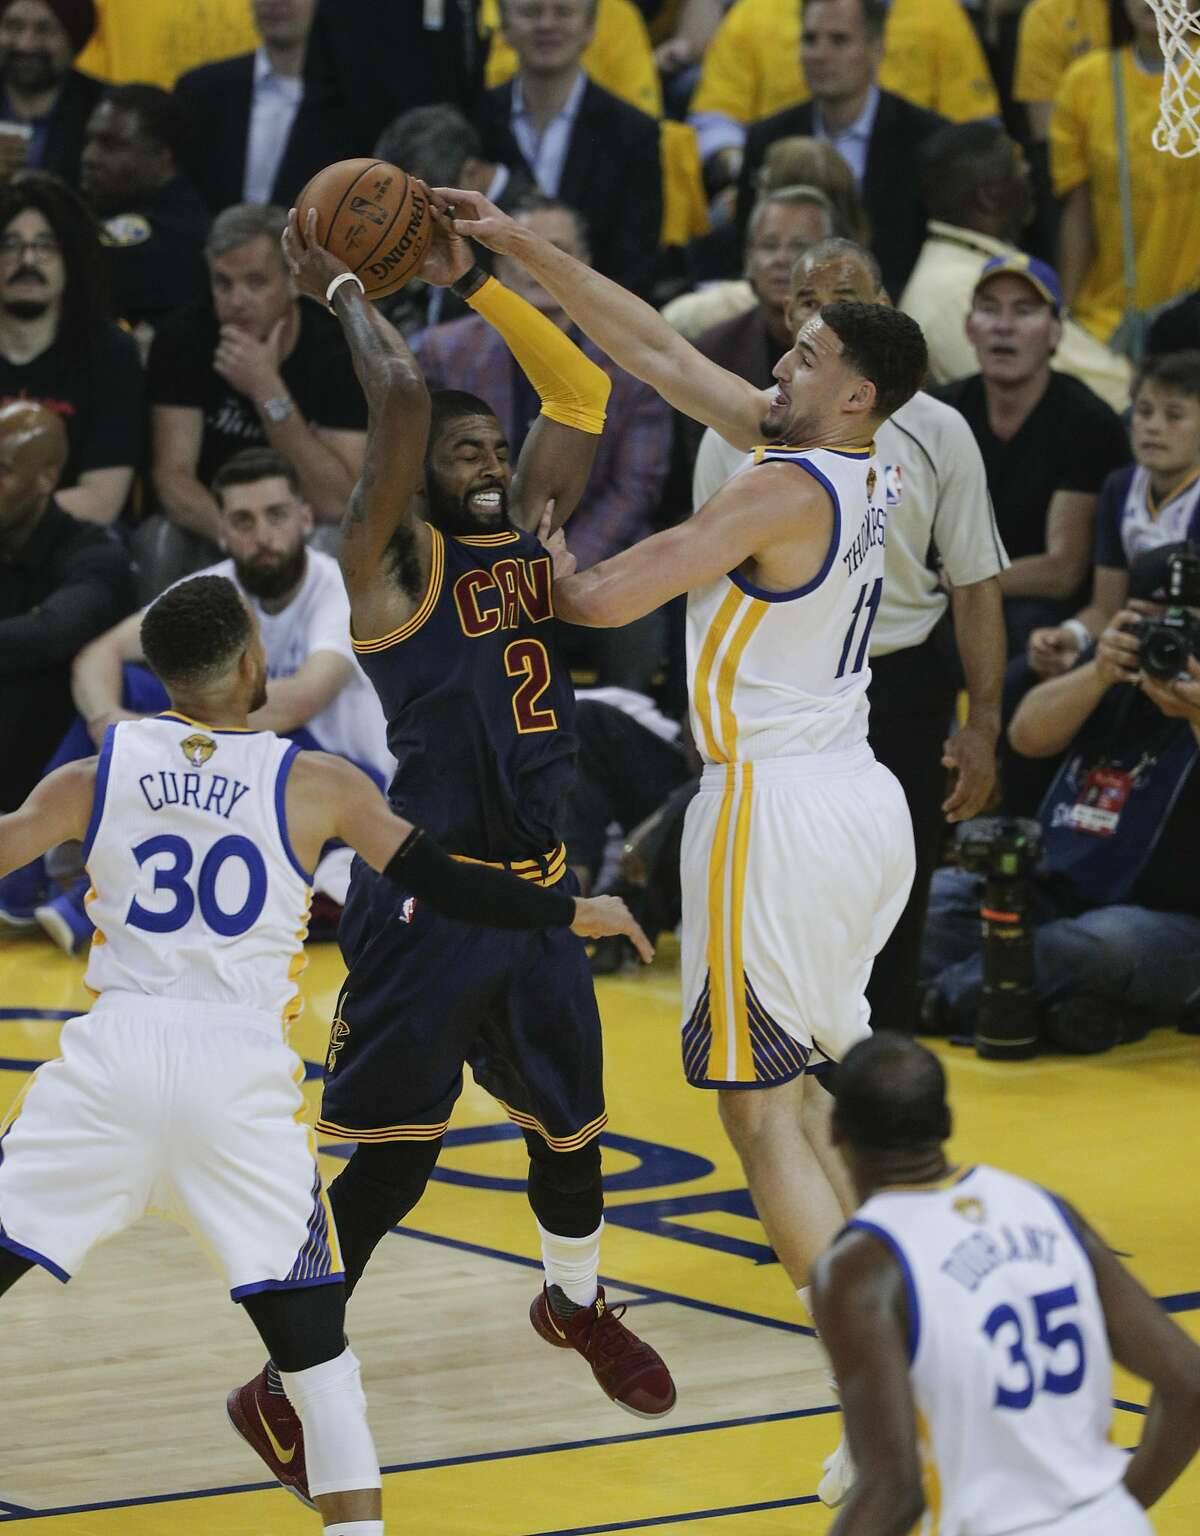 Golden State Warriors' Klay Thompson defends against Cleveland Cavaliers' Kyrie Irving in the first quarter during Game 1 of the 2017 NBA Finals at Oracle Arena on Thursday, June 1, 2017 in Oakland, Calif.